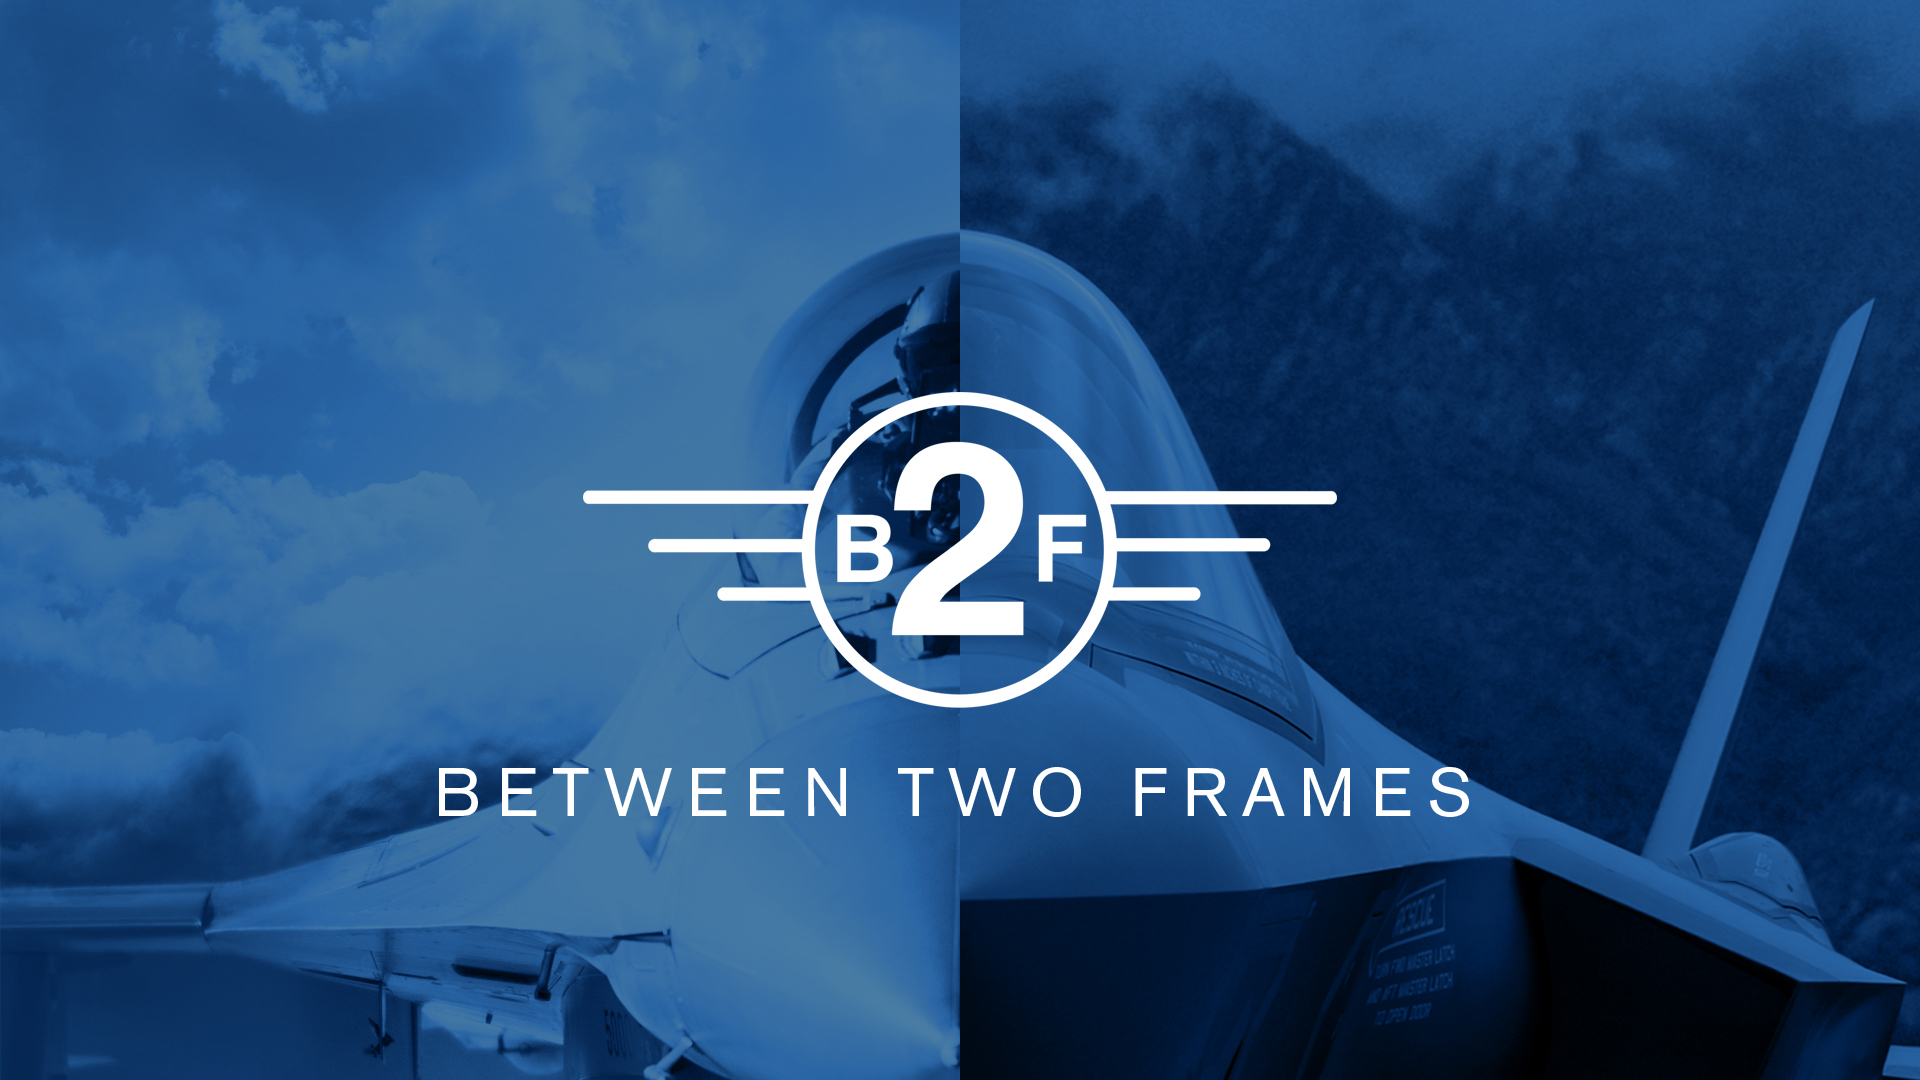 Graphic representing the video series "Between Two Frames"